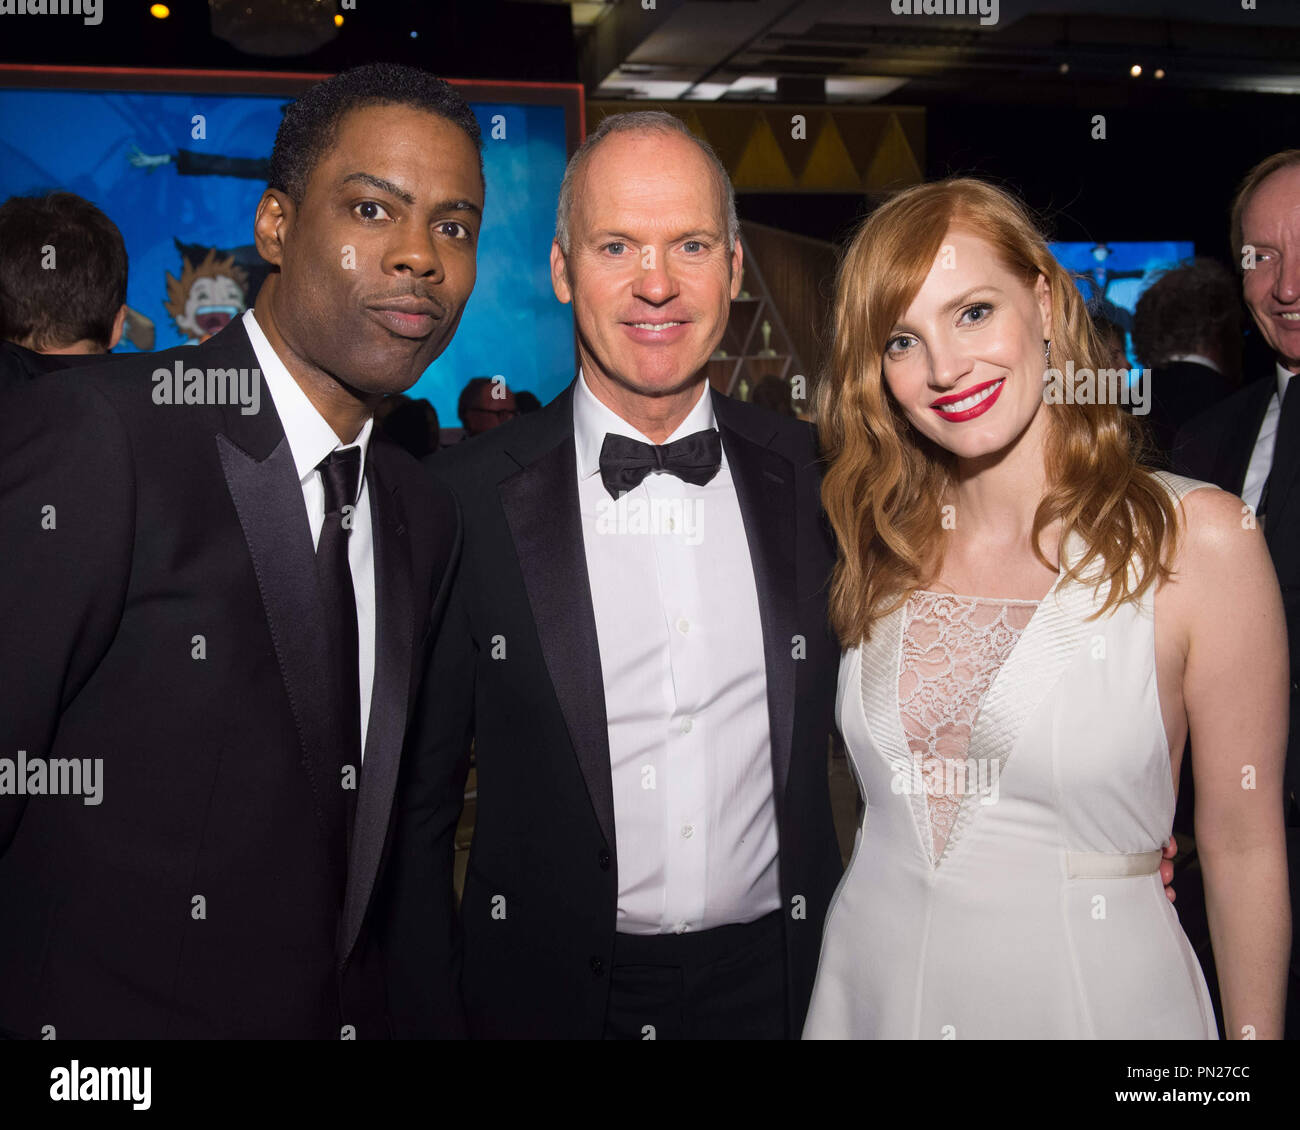 Chris Rock (left), Michael Keaton (center) and Jessica Chastain attend the 6th Annual Governors Awards in The Ray Dolby Ballroom at Hollywood & Highland Center® in Hollywood, CA, on Saturday, November 8, 2014.  File Reference # 32487 168THA  For Editorial Use Only -  All Rights Reserved Stock Photo